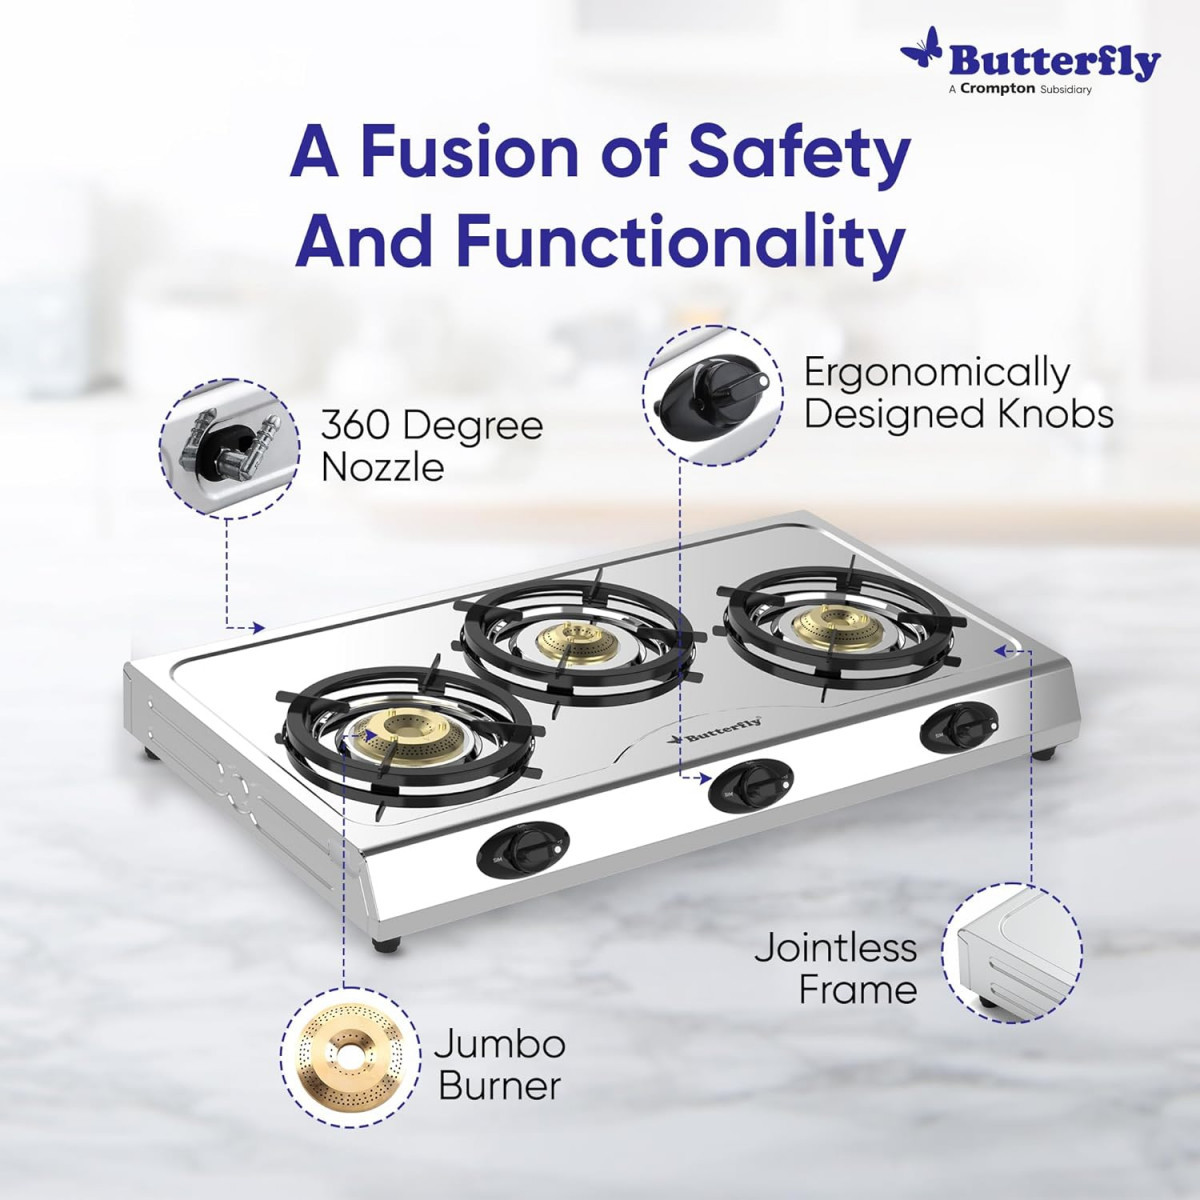 Butterfly Bolt Shakti 3B Stainless Steel Lpg Gas Stove  Saves 1 Gas Cylinder  Indias First Bee 2 Star Rated Gas Stove  Jumbo Burner  High Thermal Efficiency - Open